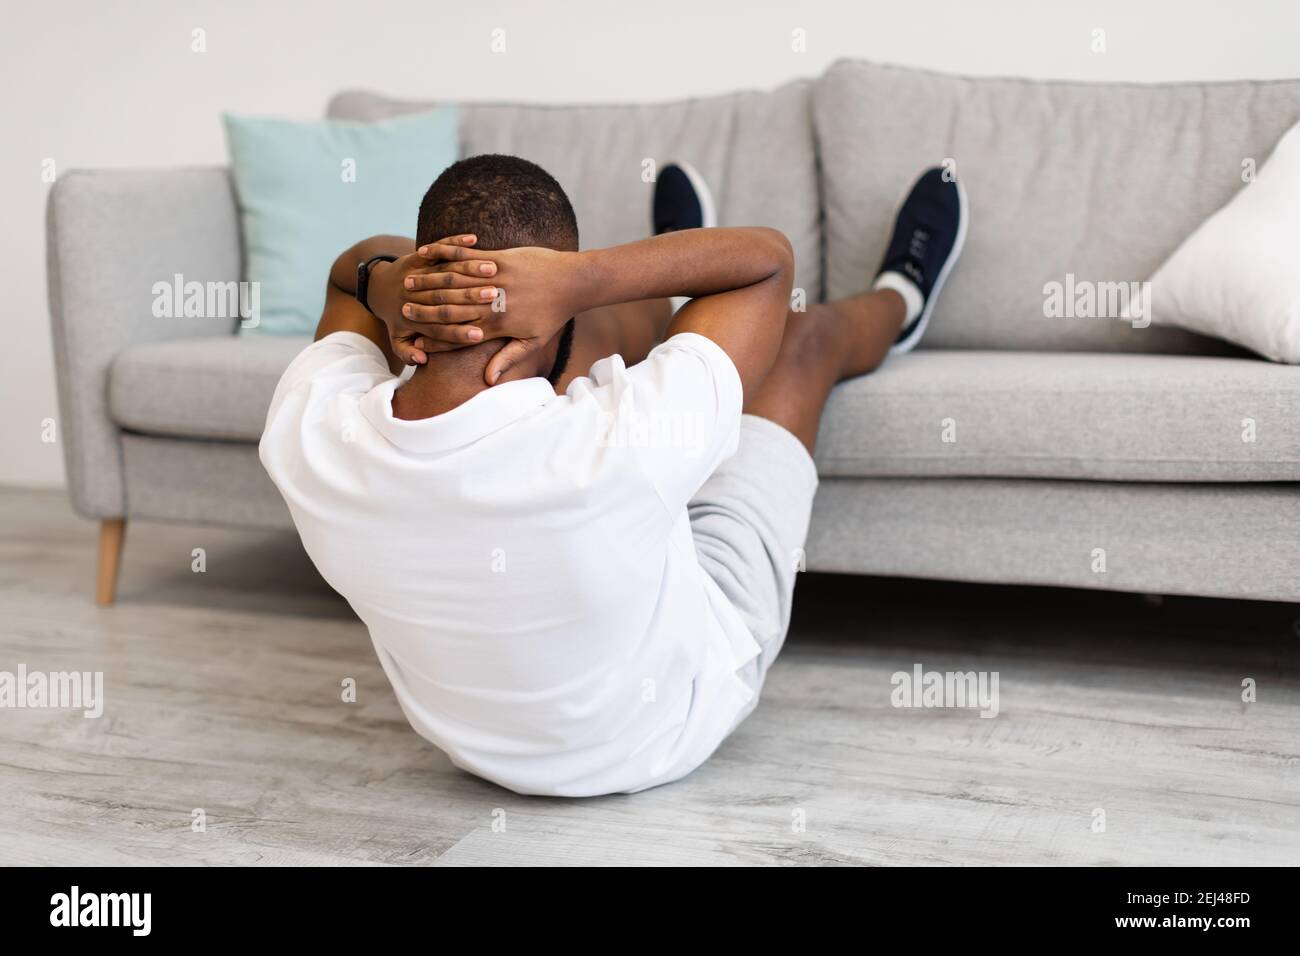 African Man Doing Abs With Legs On Couch At Home Stock Photo